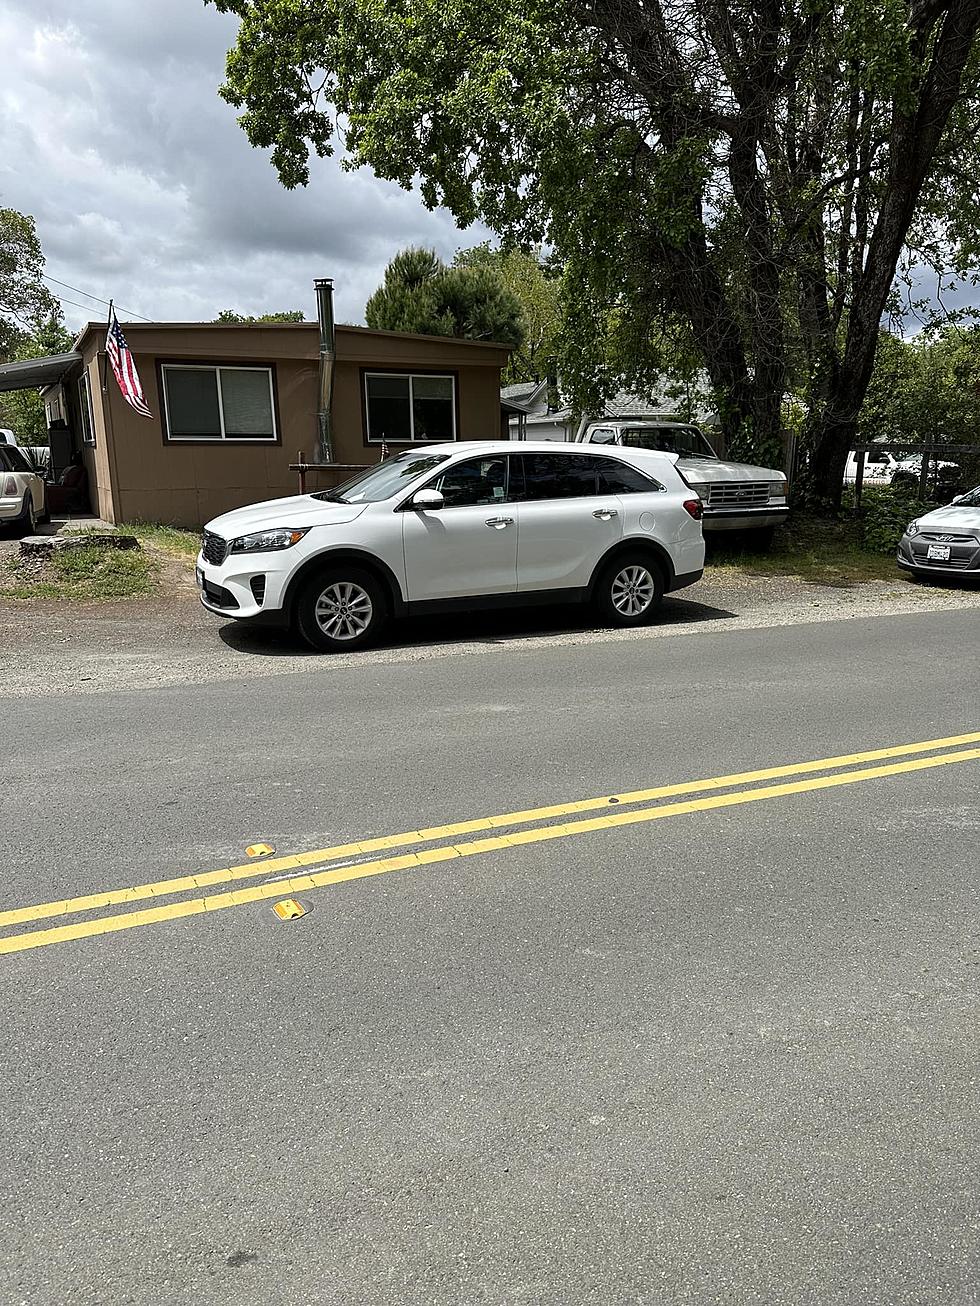 Is It Illegal To Park In Front Of Someone’s House In Massachusetts?